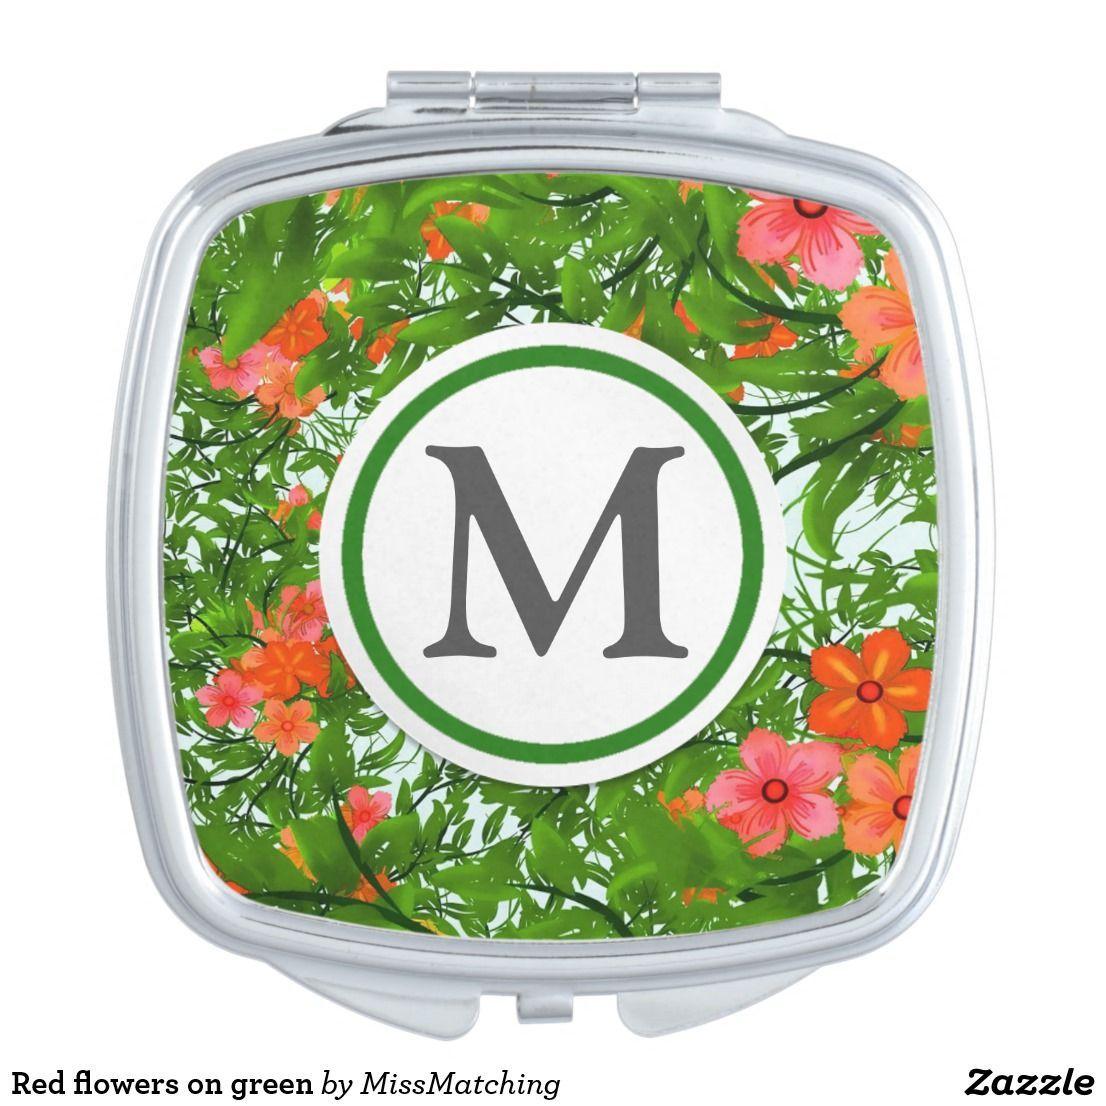 Red Flower with Green Logo - Red flowers on green makeup mirror | Compact Mirrors | Compact ...